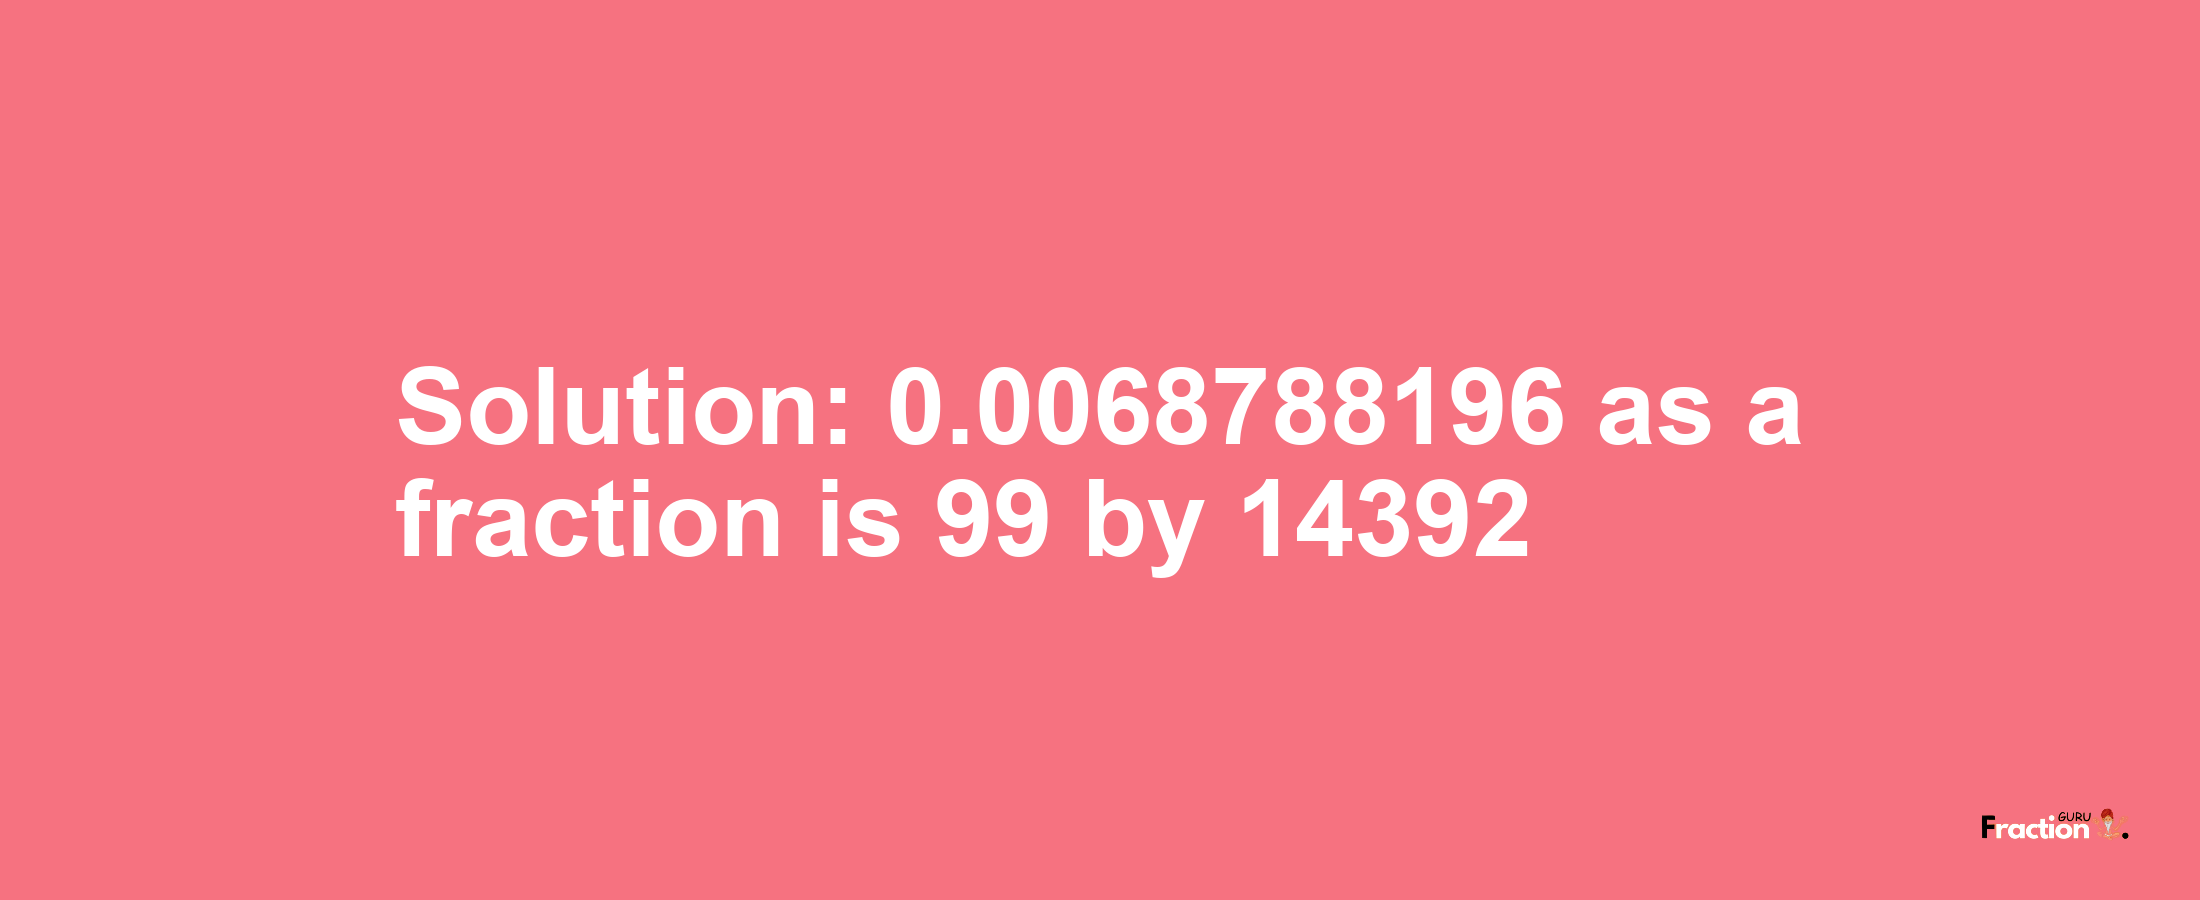 Solution:0.0068788196 as a fraction is 99/14392